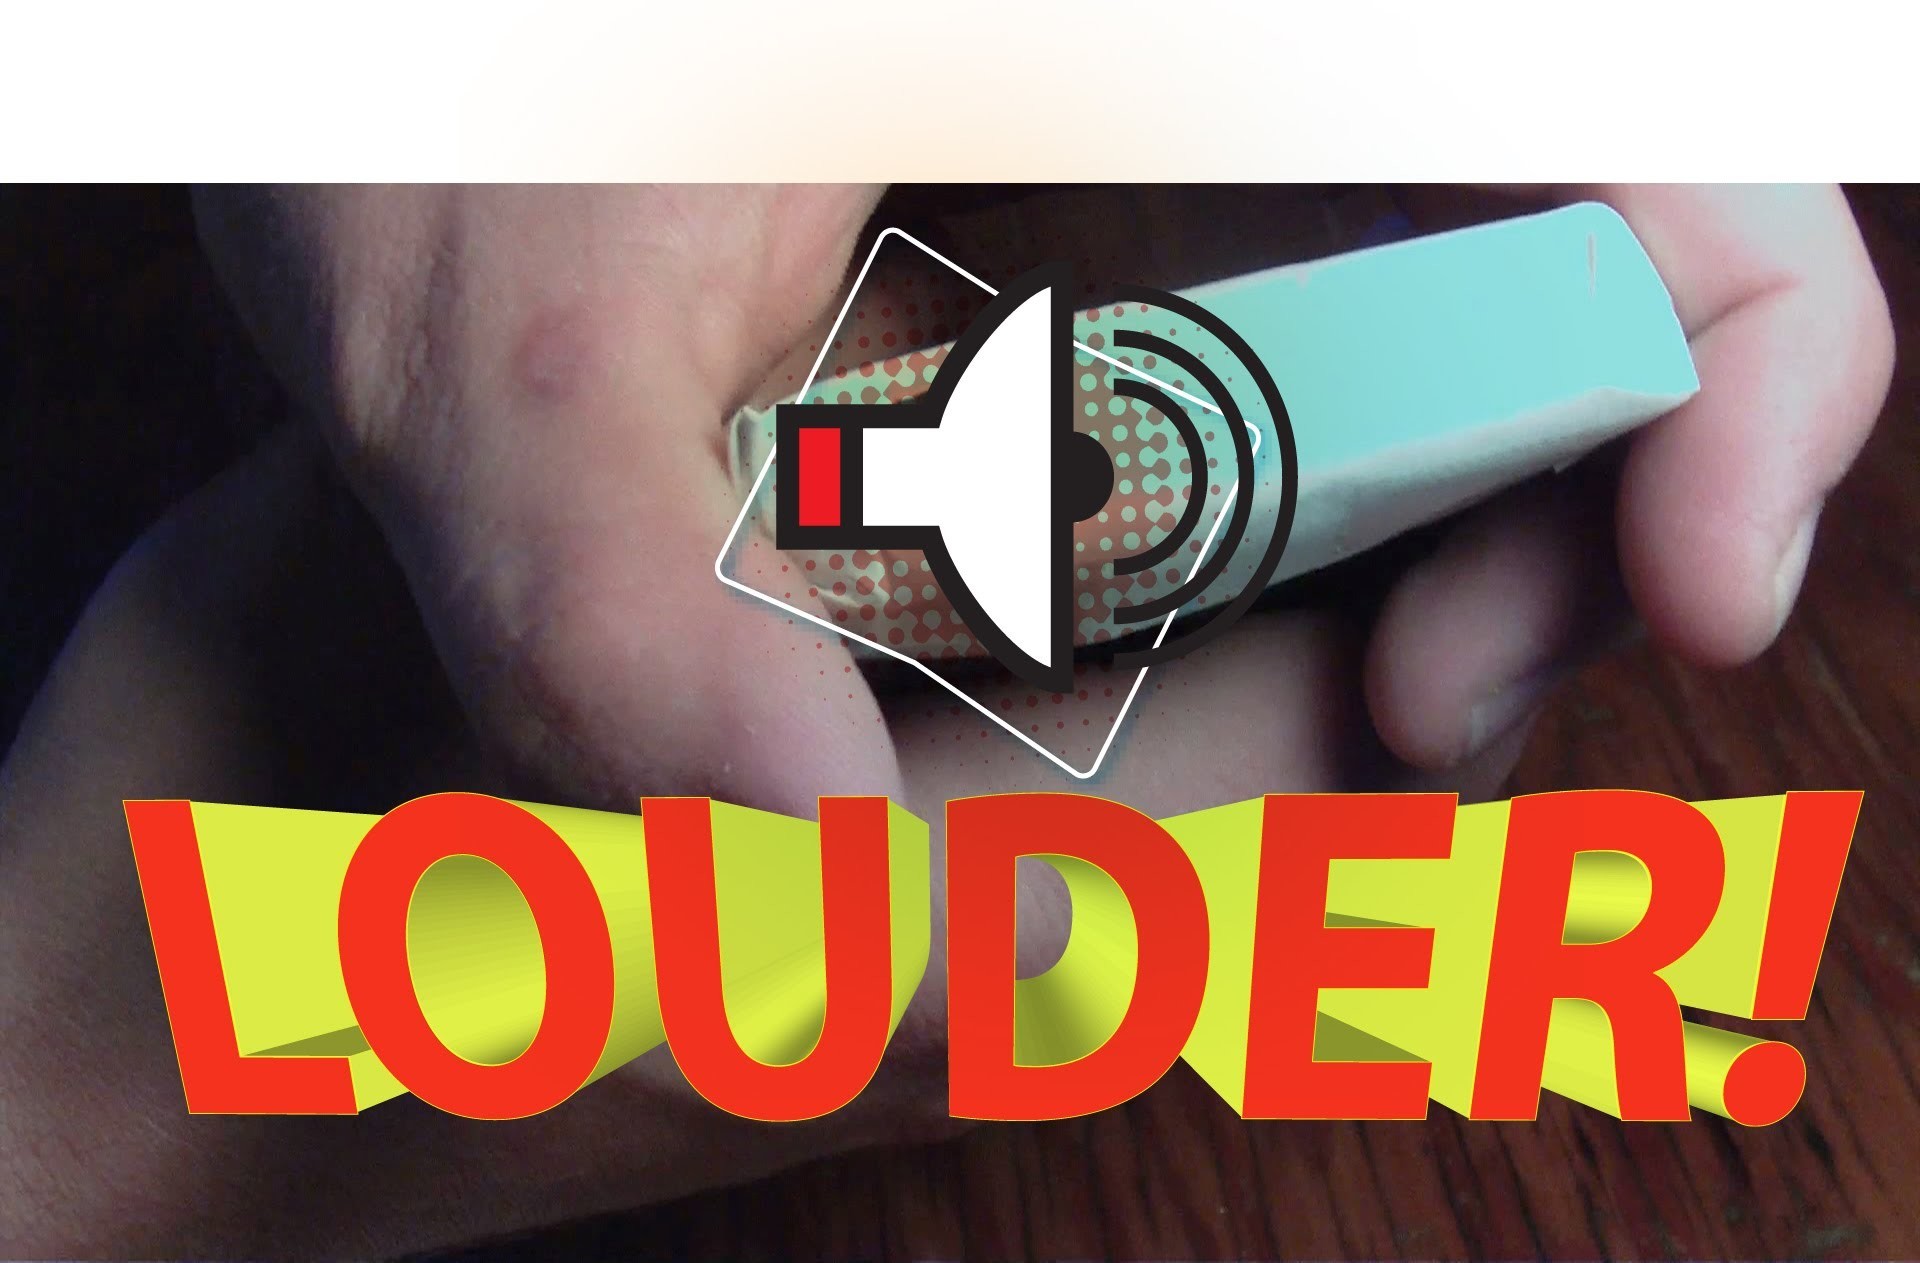 How to make any iPhone LOUDER for FREE!  Loudspeaker for any iPhone (DIY)